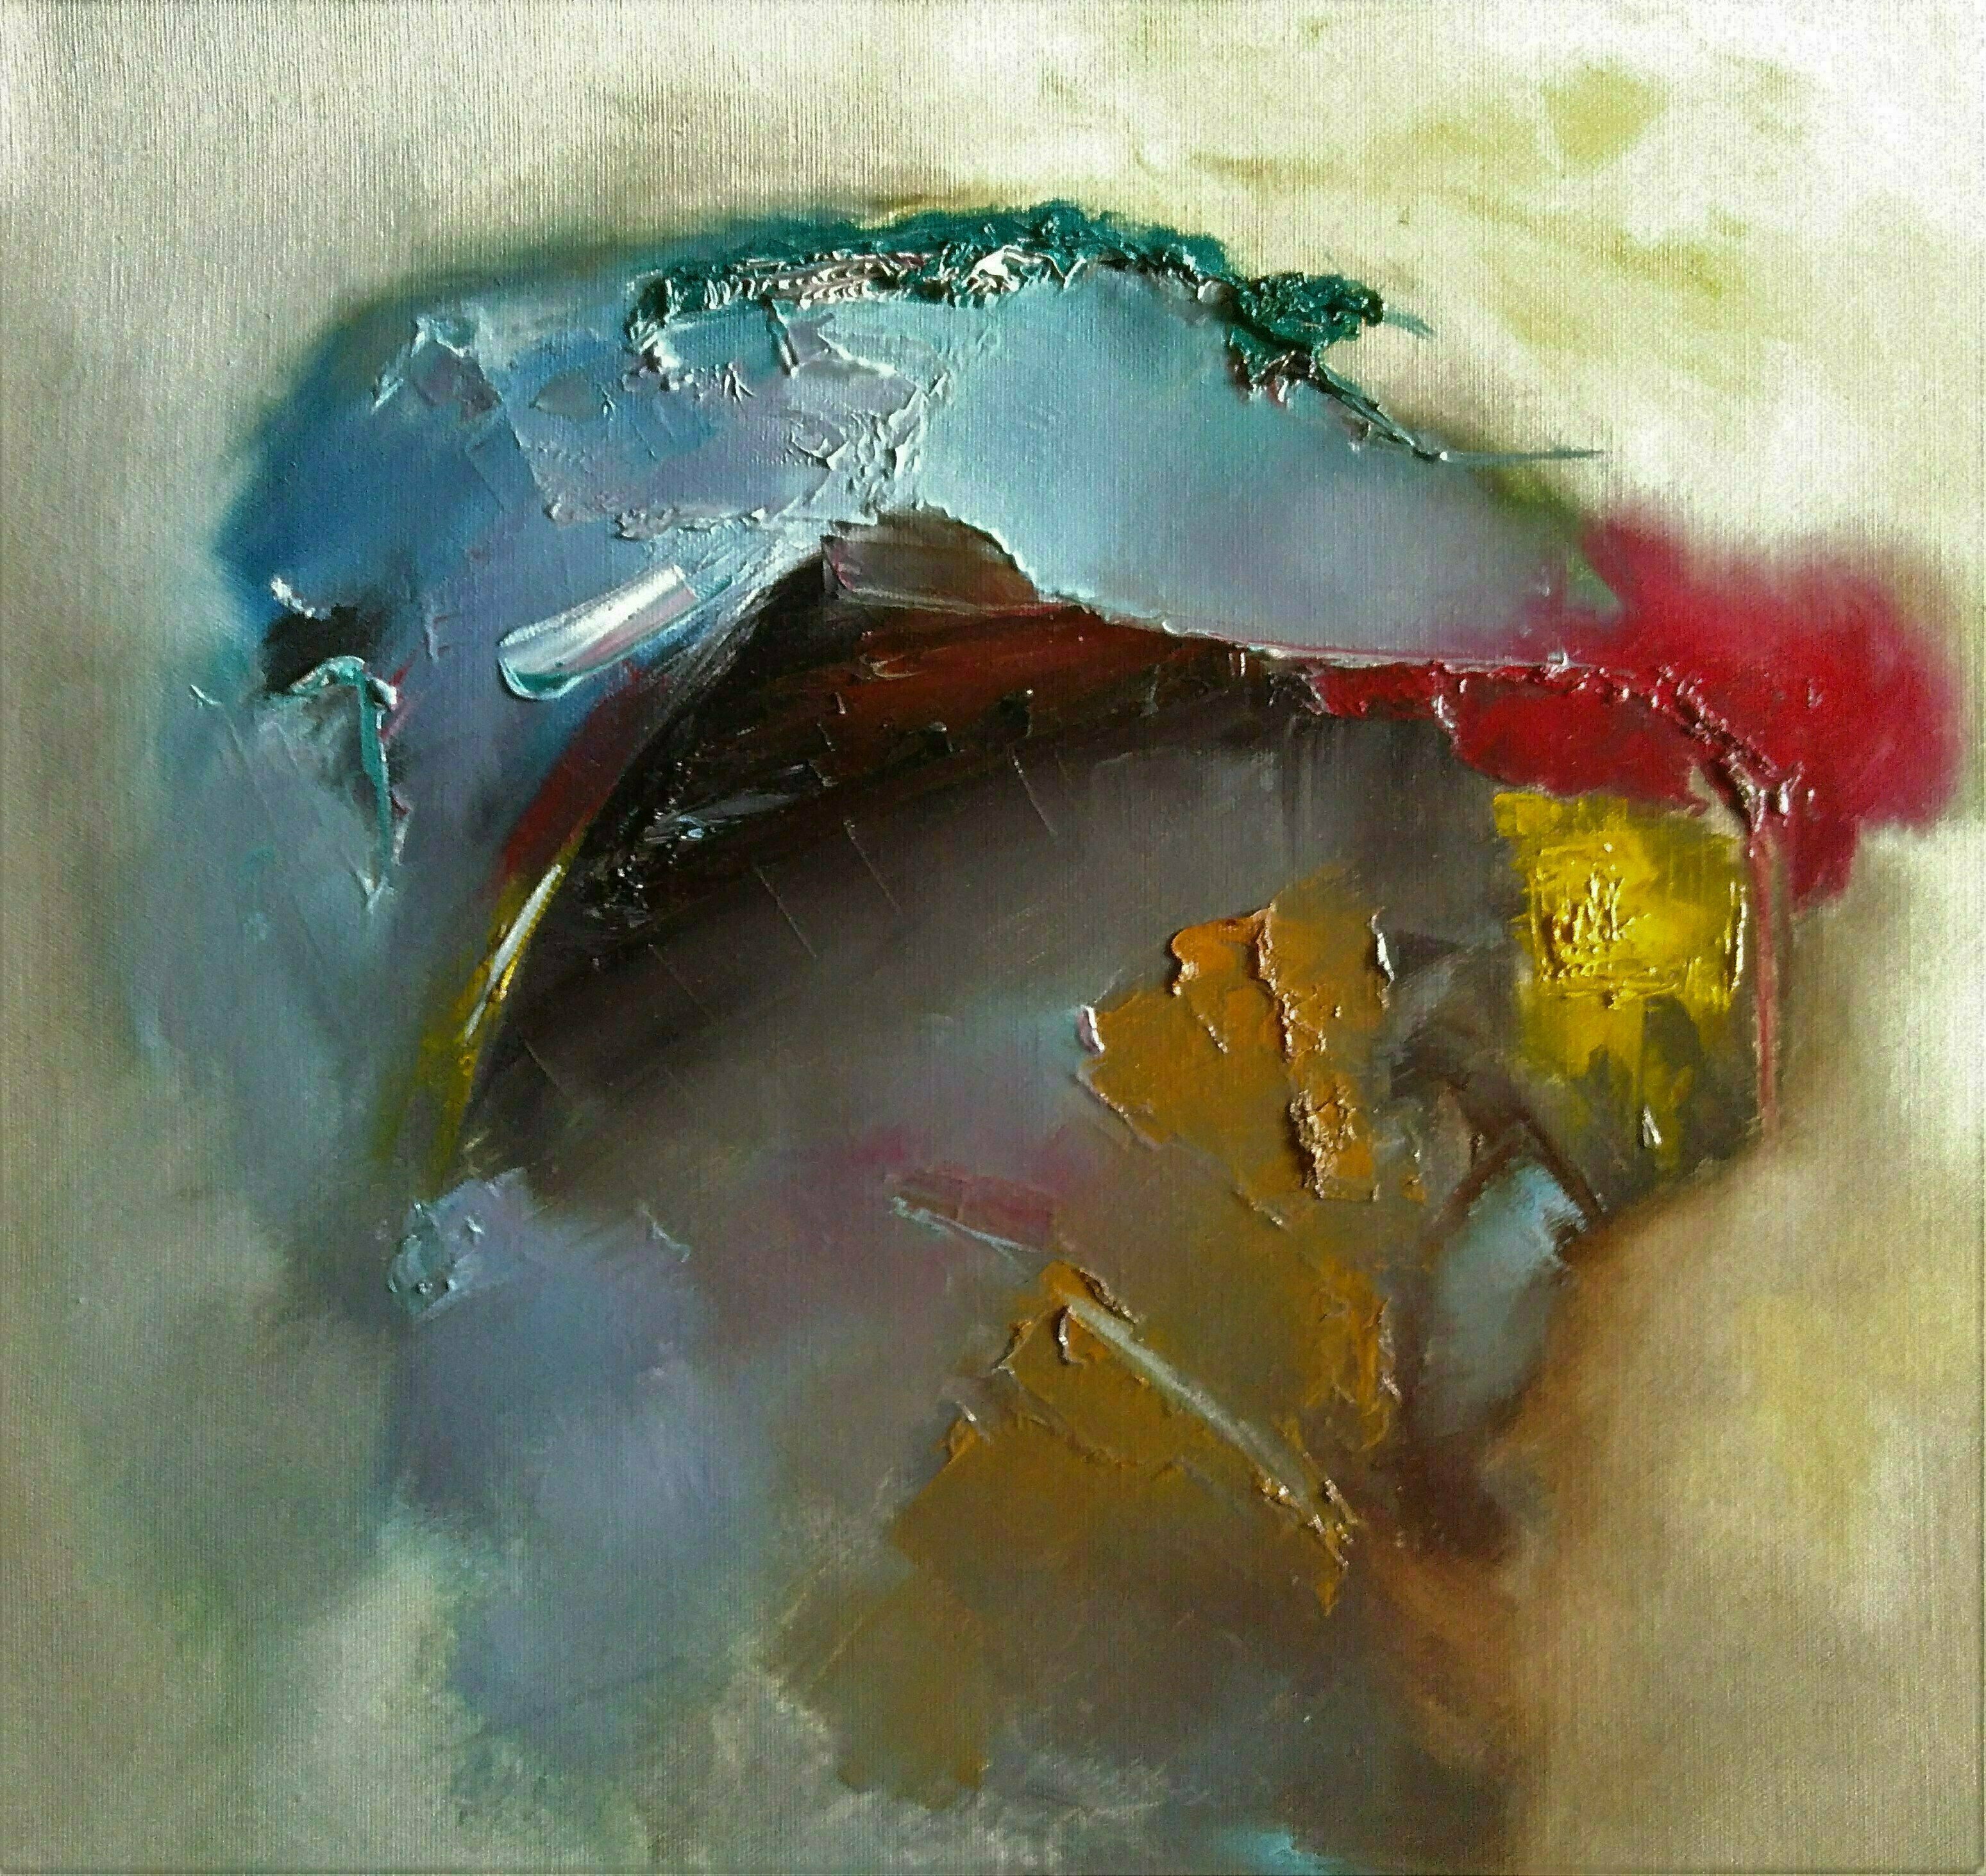 Stefan Fiedorowicz; Daylight Kissing The Sky, 2020, Original Painting Oil, 50 x 50 cm. Artwork description: 241 Daylight Kissing The SkyBetween reality on the one hand, and the point where the mind strikes reality, thereaEURtms a middle zone, a rainbow edge where beauty comes into being, where two very different surfaces mingle and blue to provide what life does not and this ...